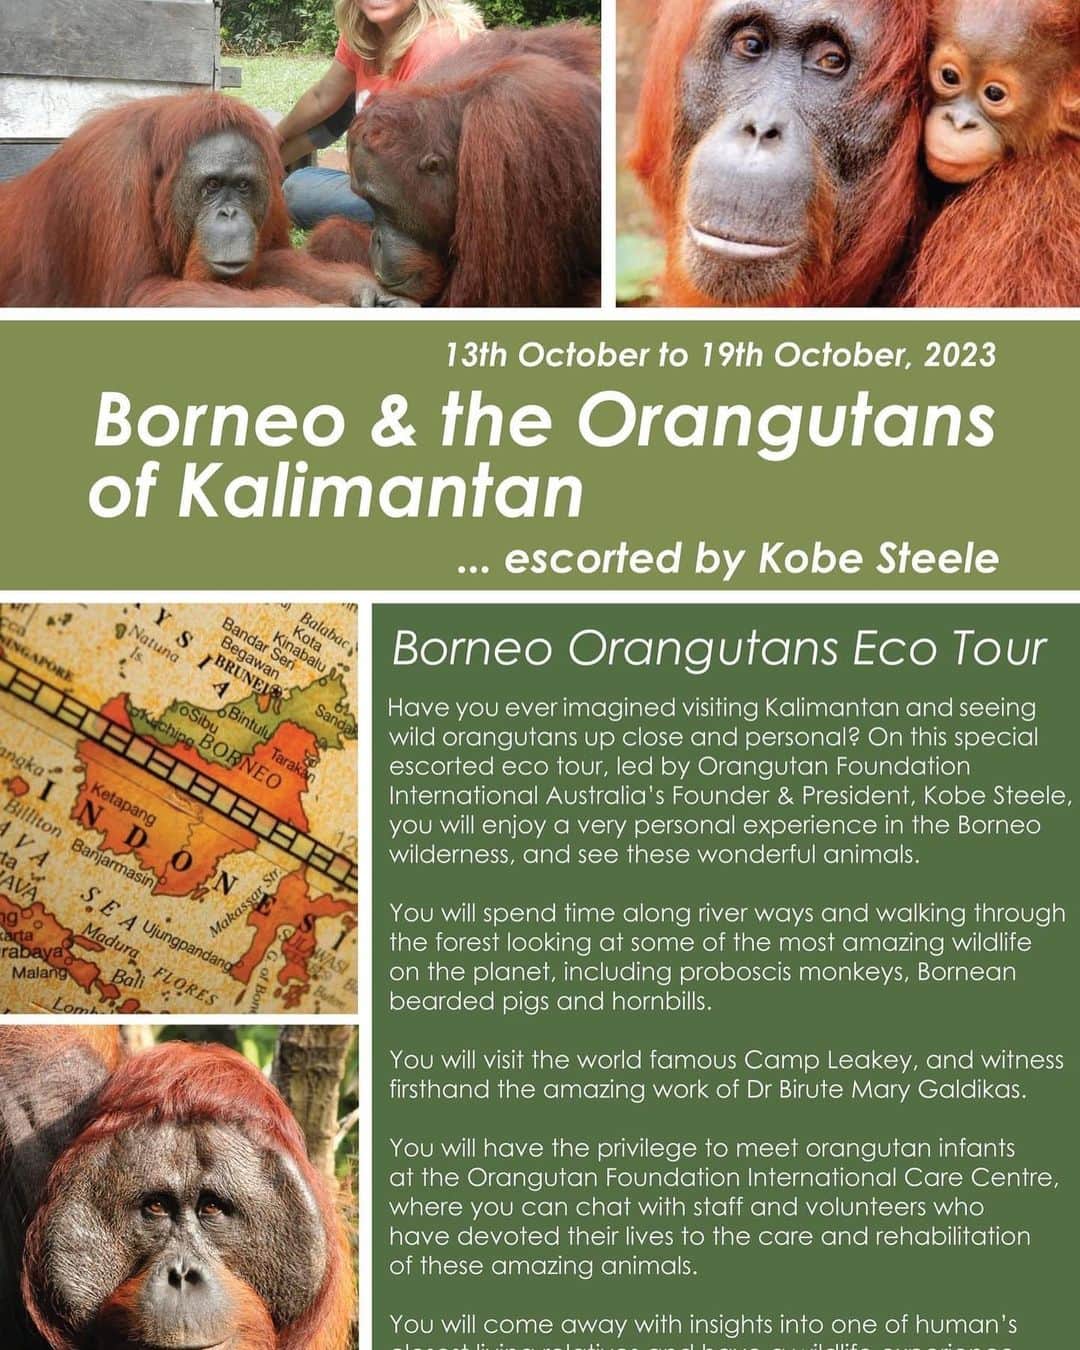 OFI Australiaのインスタグラム：「Have you ever dreamed about traveling to Borneo and spending time with orangutans?  We still have places available on our OFI Australia October, 2023 Borneo Orangutans Eco Tour, escorted by OFIA President Kobe Steele. As part of this extraordinary trip, you will have the privelege of visiting the OFI orphan orangutan Care Centre, normally closed to the general public. This is a life changing experience ... like spending a week in a David Attenborough documentary.  If you would like to come or for more information, please call Kobe on (+61) 0404 036 653 or you can email kobe@ofiaustralia.com.  NB - There are mandatory inoculations and medical tests necessary along with a strict COVID-19 protocol, so that you can visit the Care Centre. This is for the safety of the orangutans.  #orangutanecotour #borneoholiday」